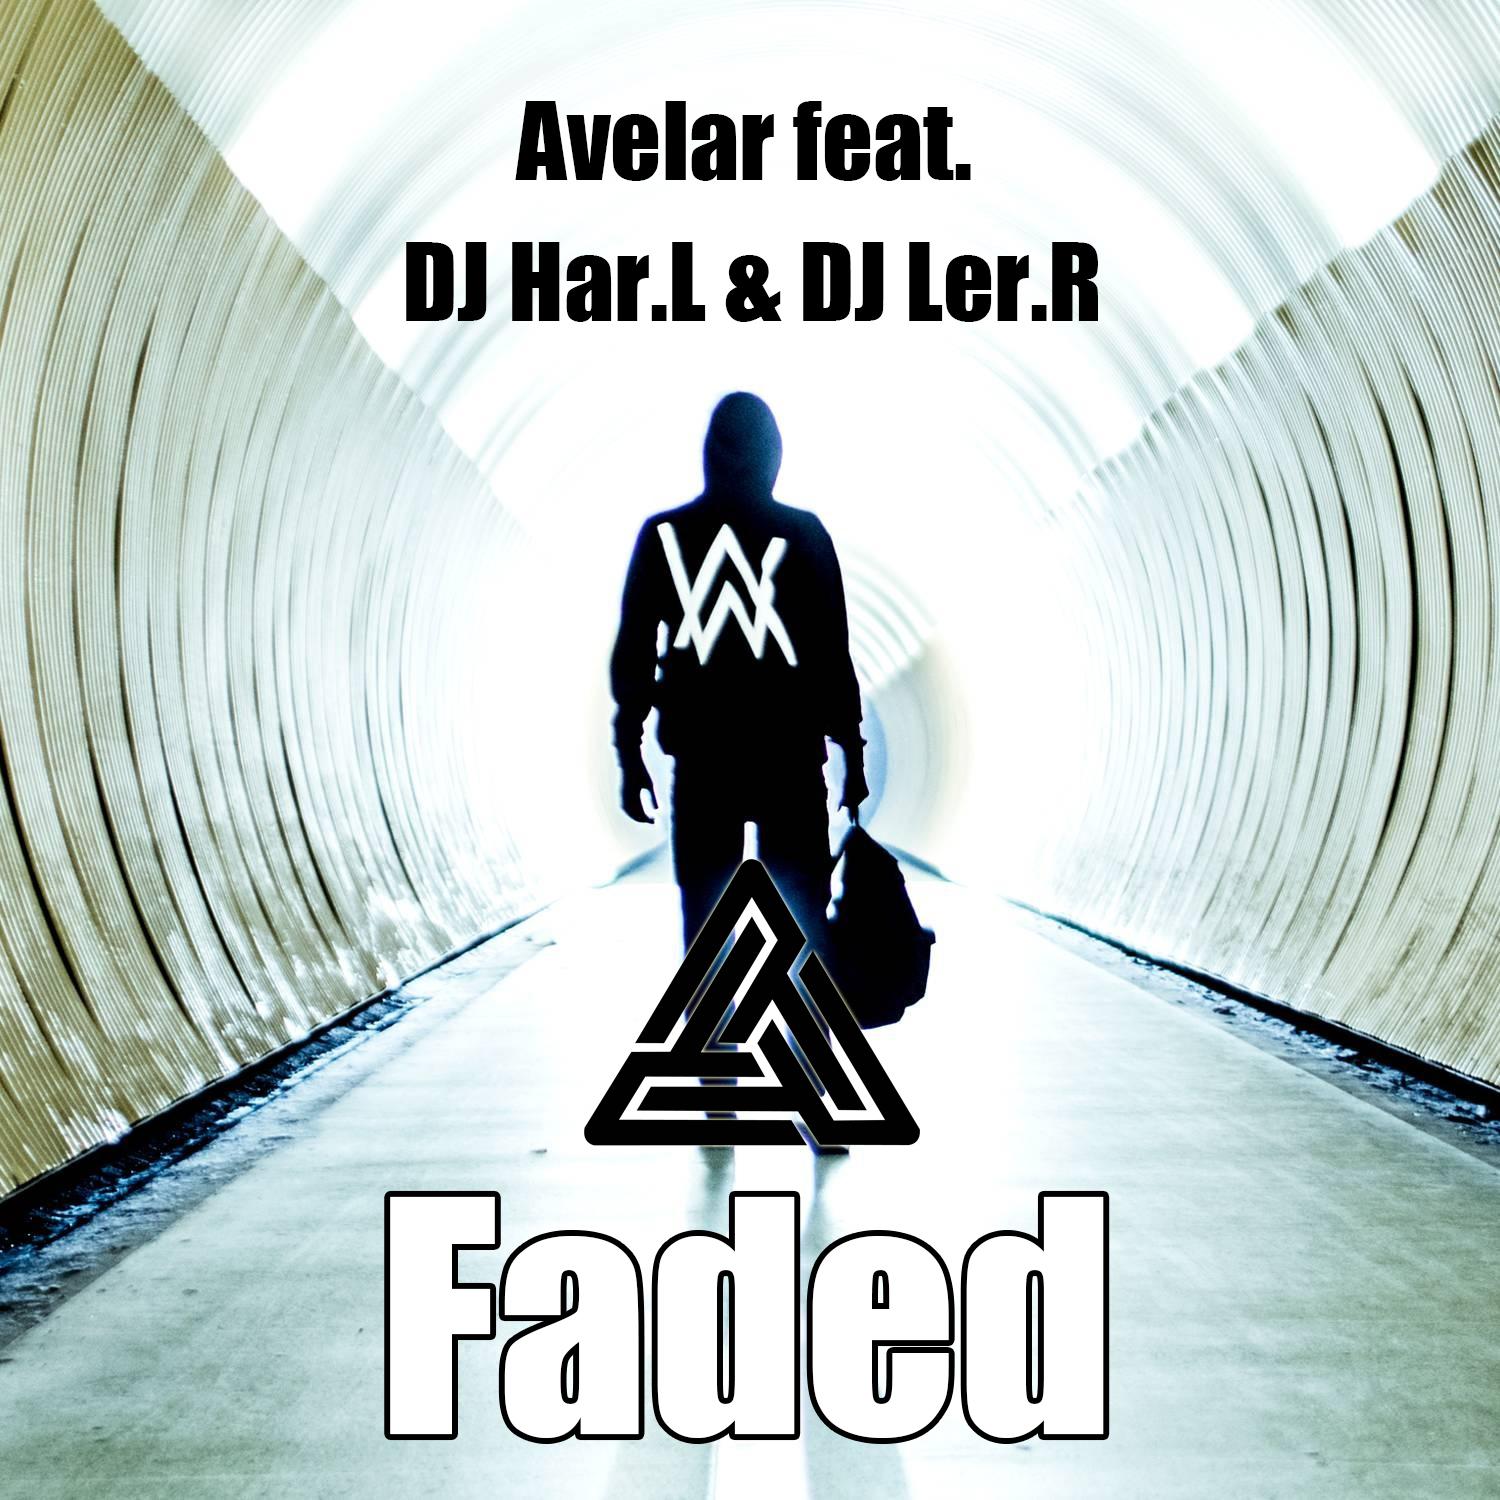 l & dj ler.r & avelar feat. - faded (extended mix)